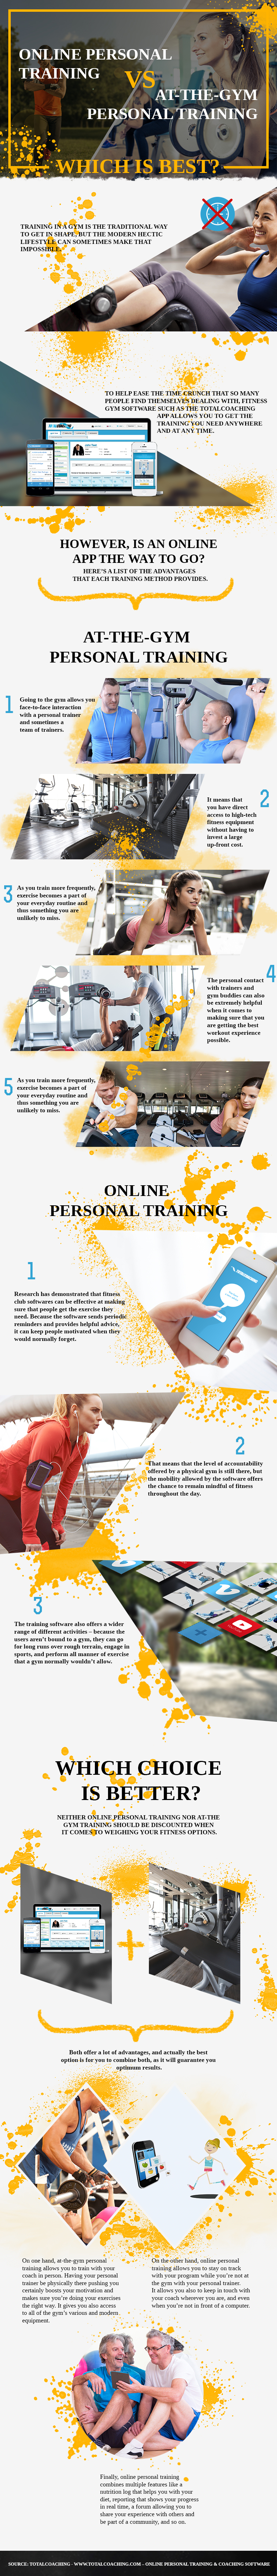 Online personal training vs At-the-gym personal training